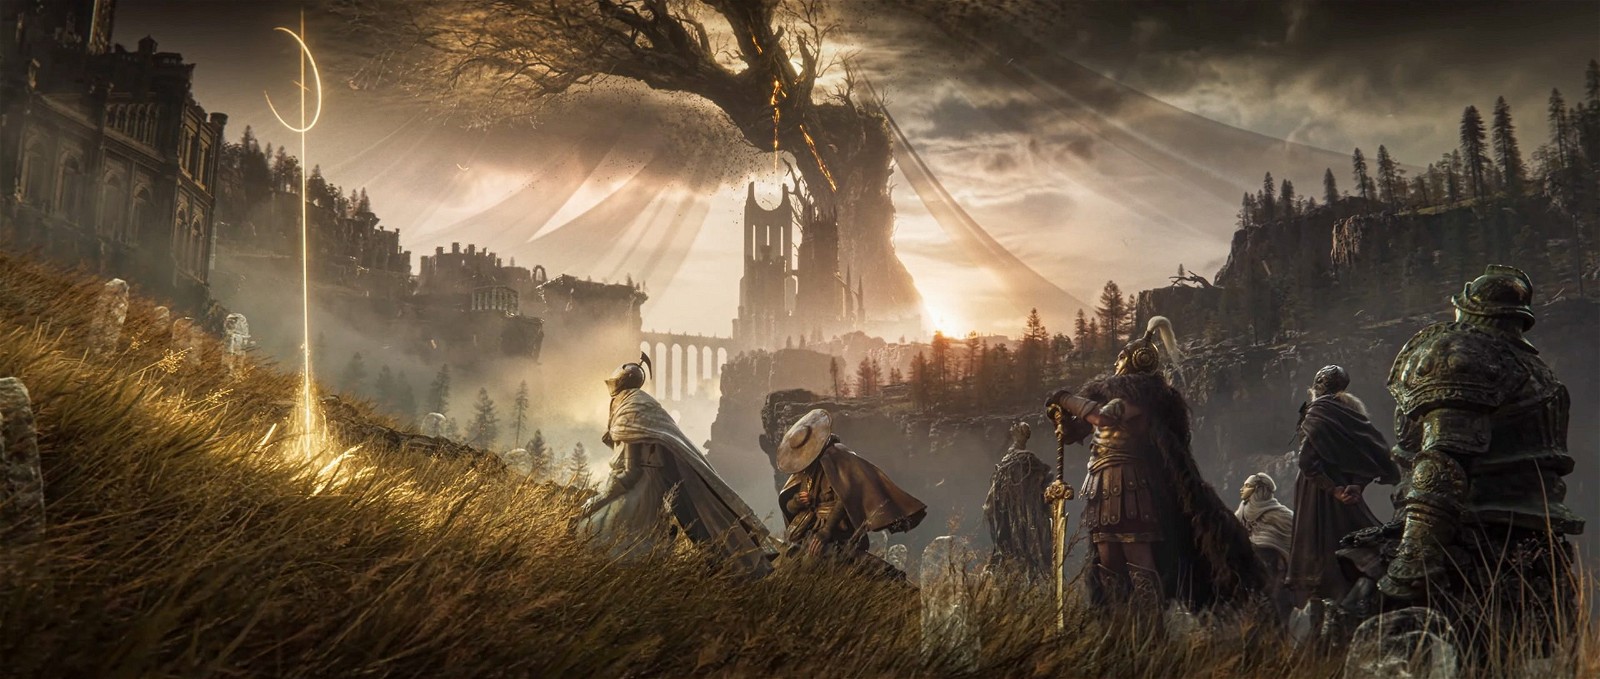 FromSoftware may be pulling a misdirect to allow fans to go into Shadow of the Erdtree unaware | FromSoftware